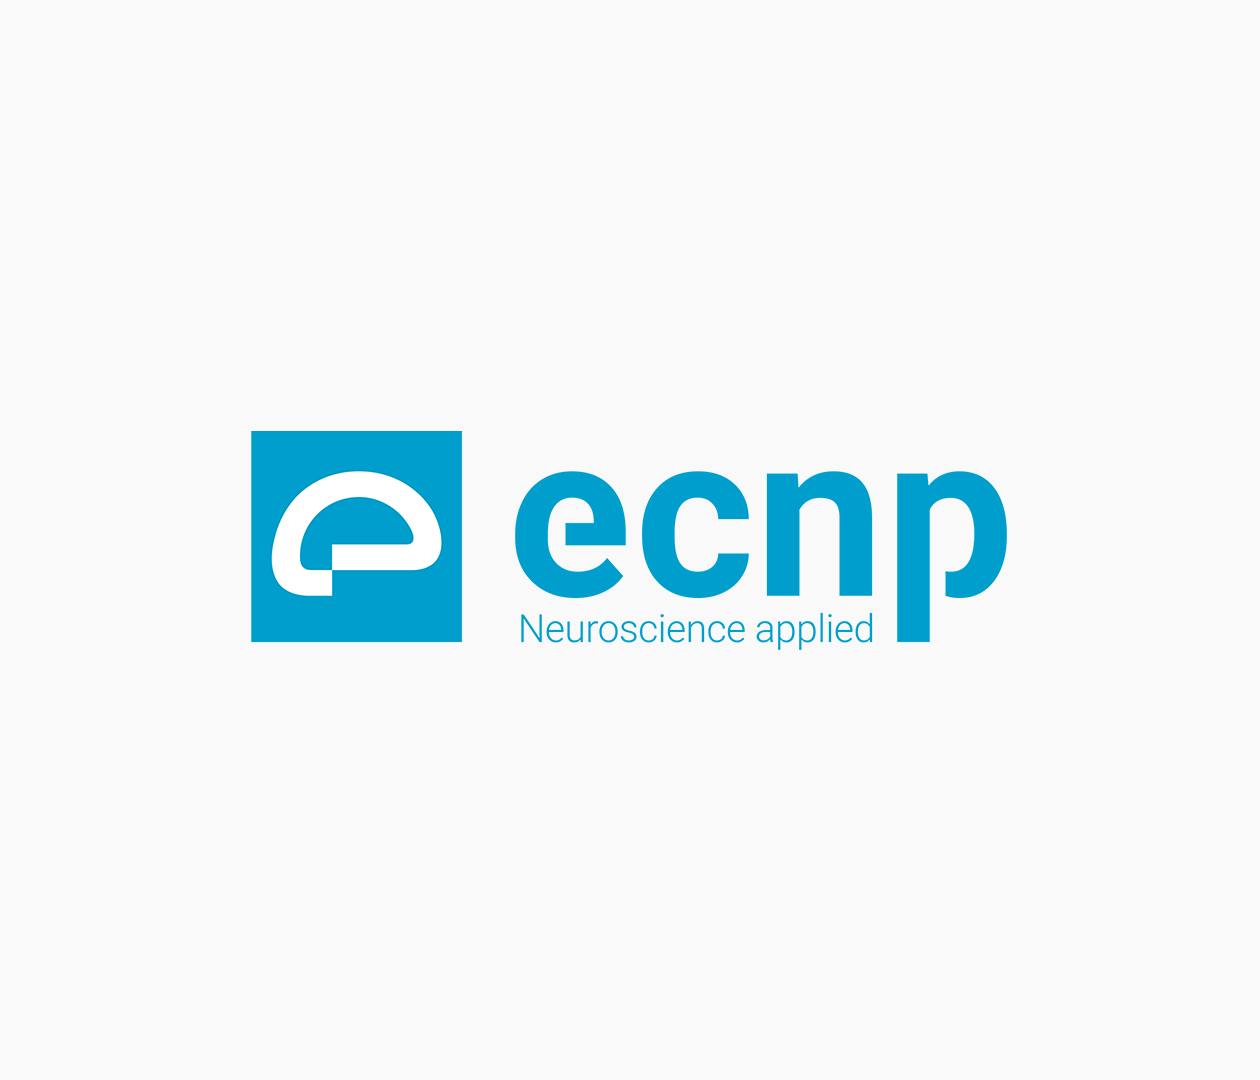 ECNP logo: light blue square containing a stylized white brain and written on the side "ecnp Neuroscience applied."